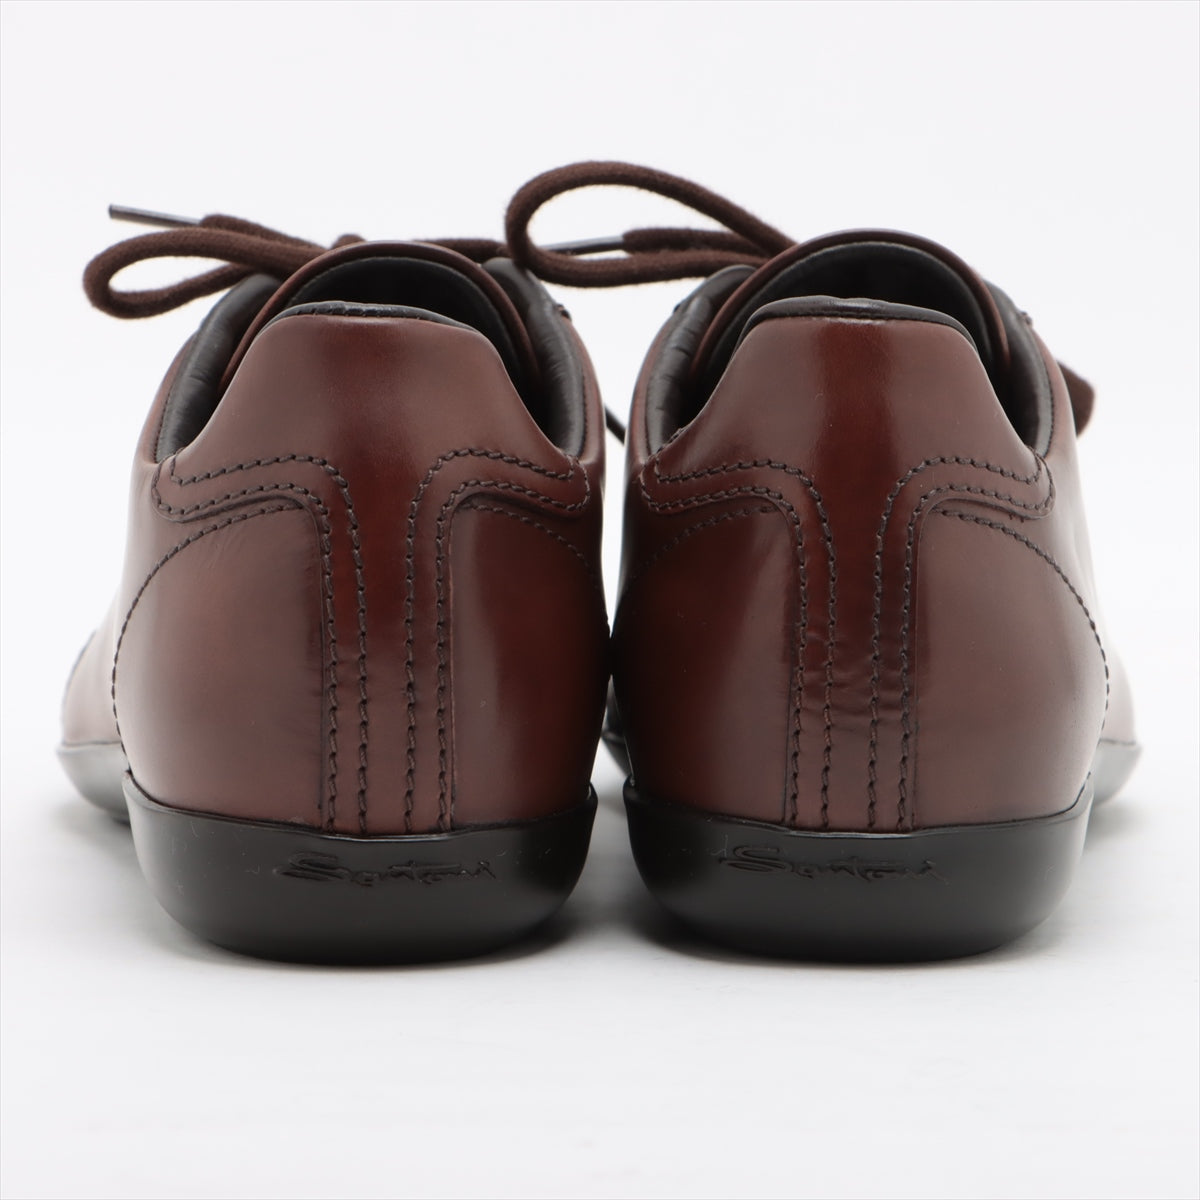 Santoni Leather Leather shoes 5 Men's Brown Replacement Laces Included There is a crack in the sole on the left foot